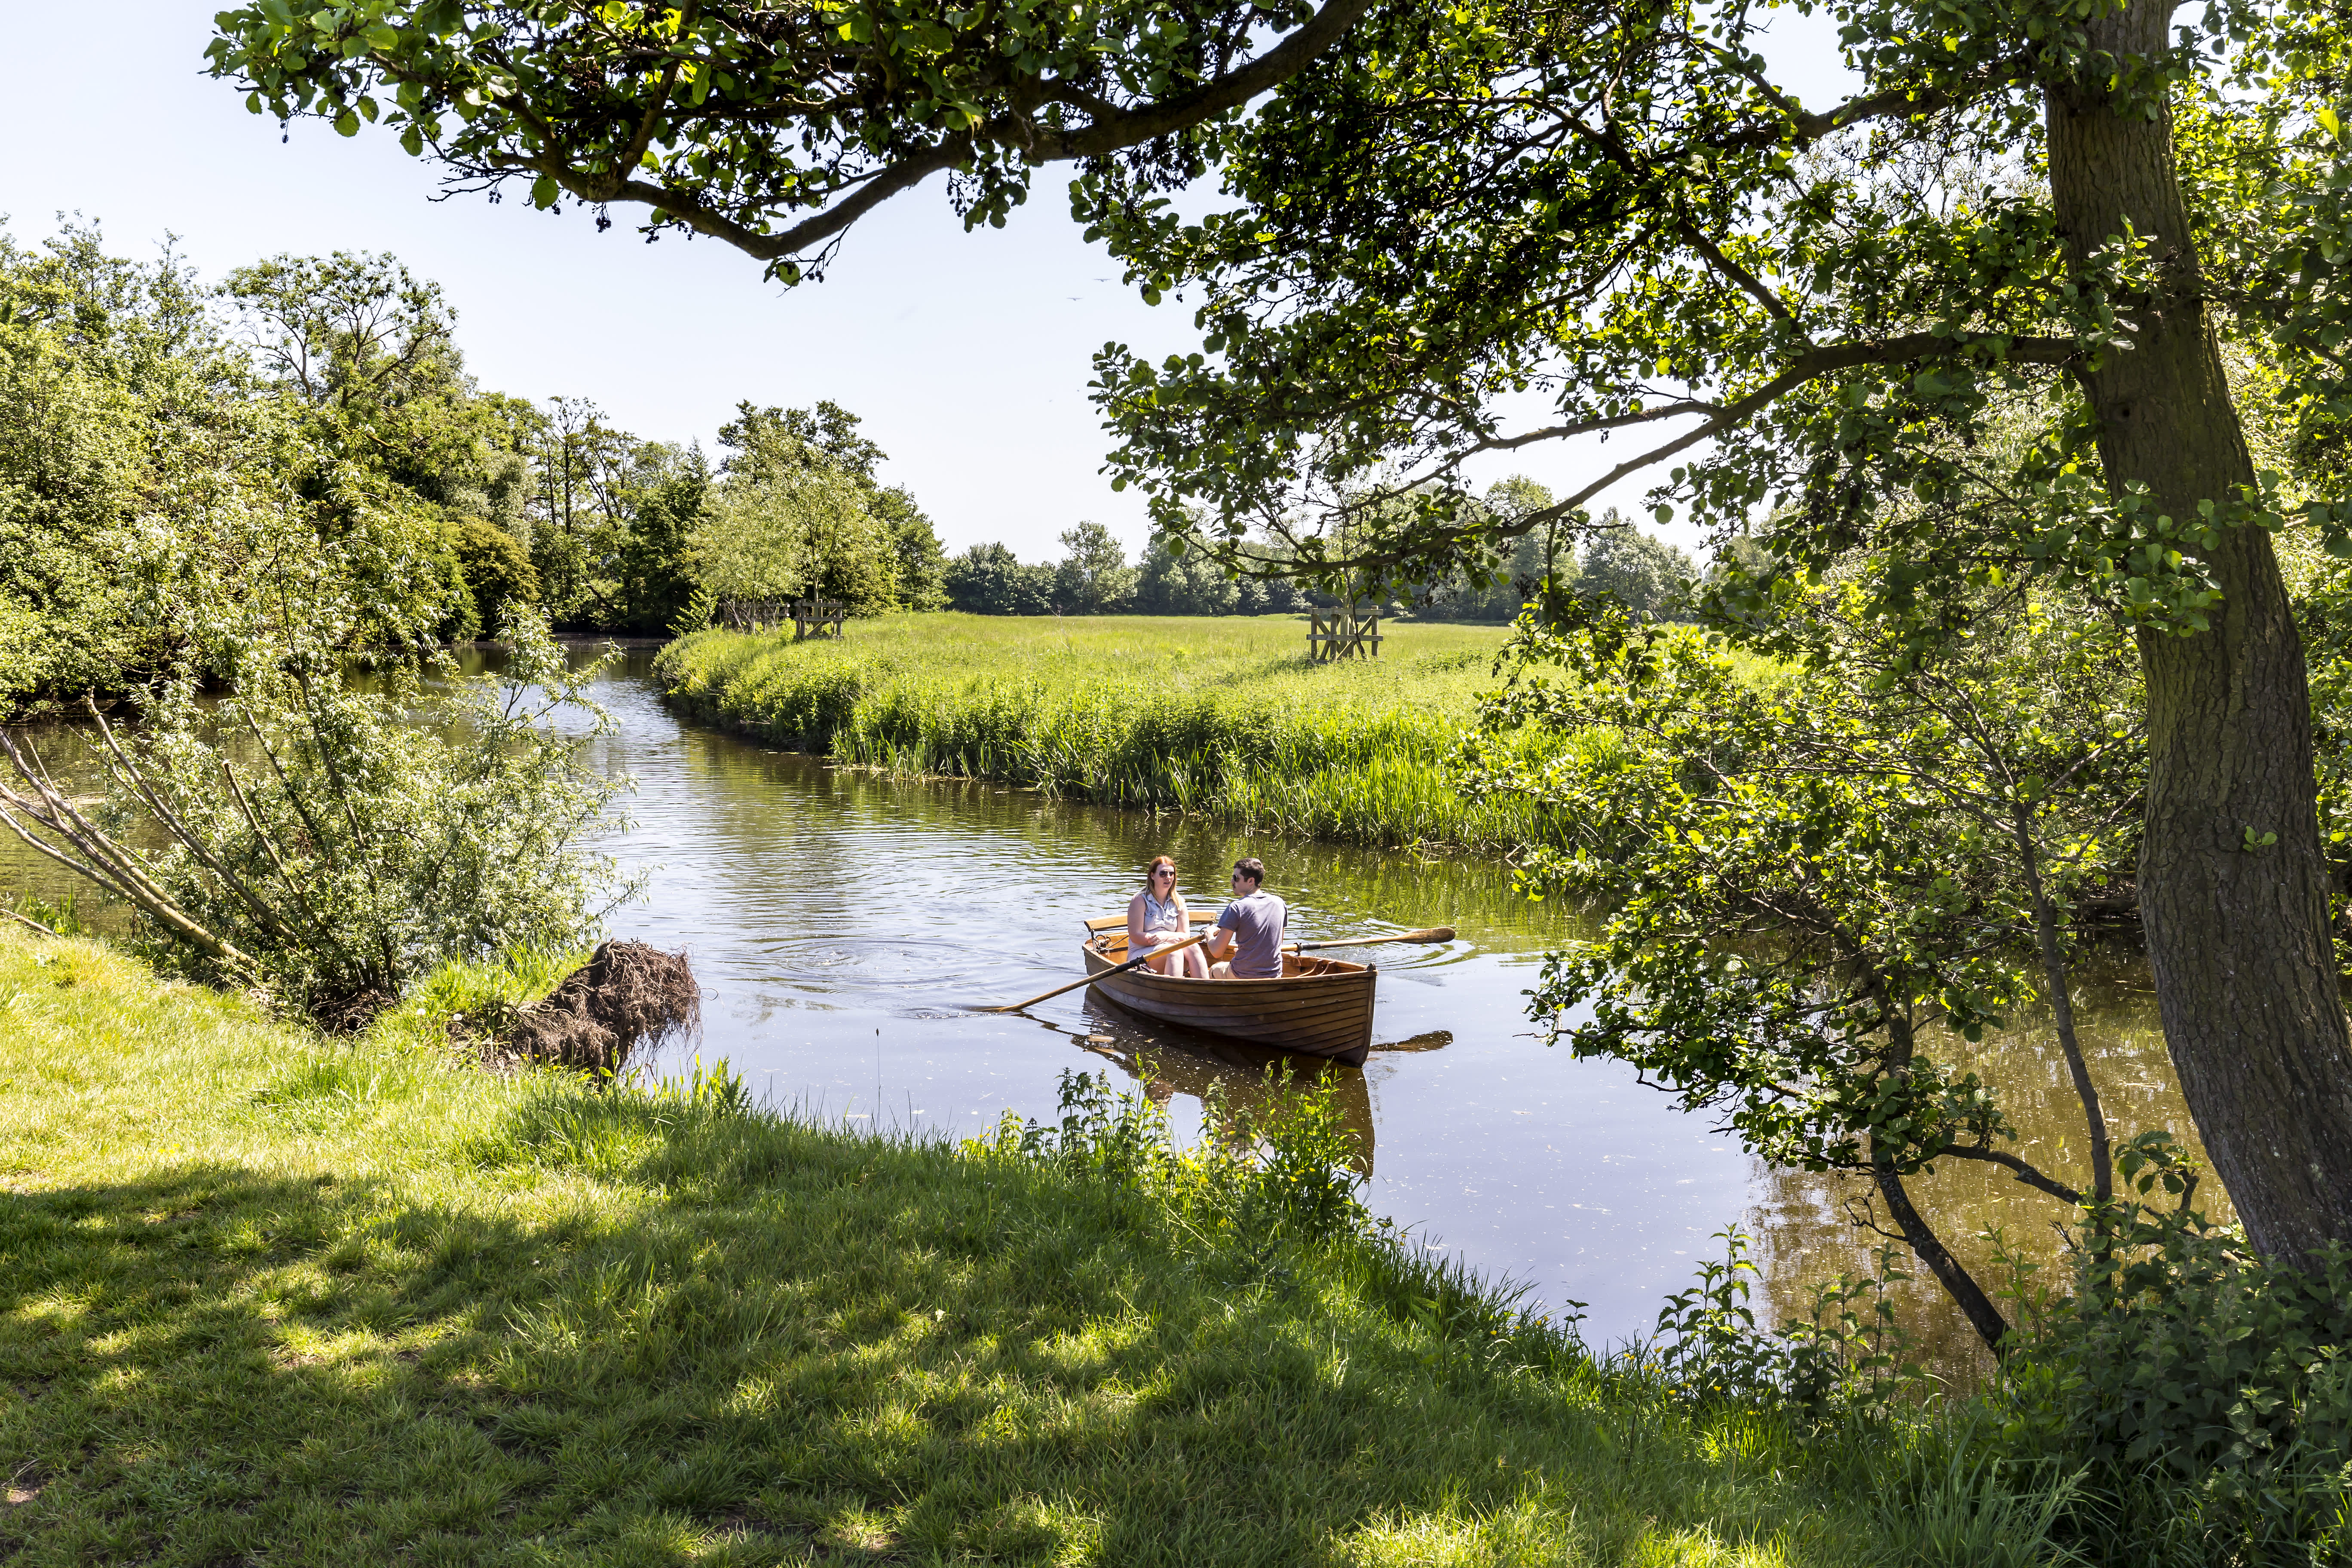 A couple are rowing a boat down a river in the picturesque countryside